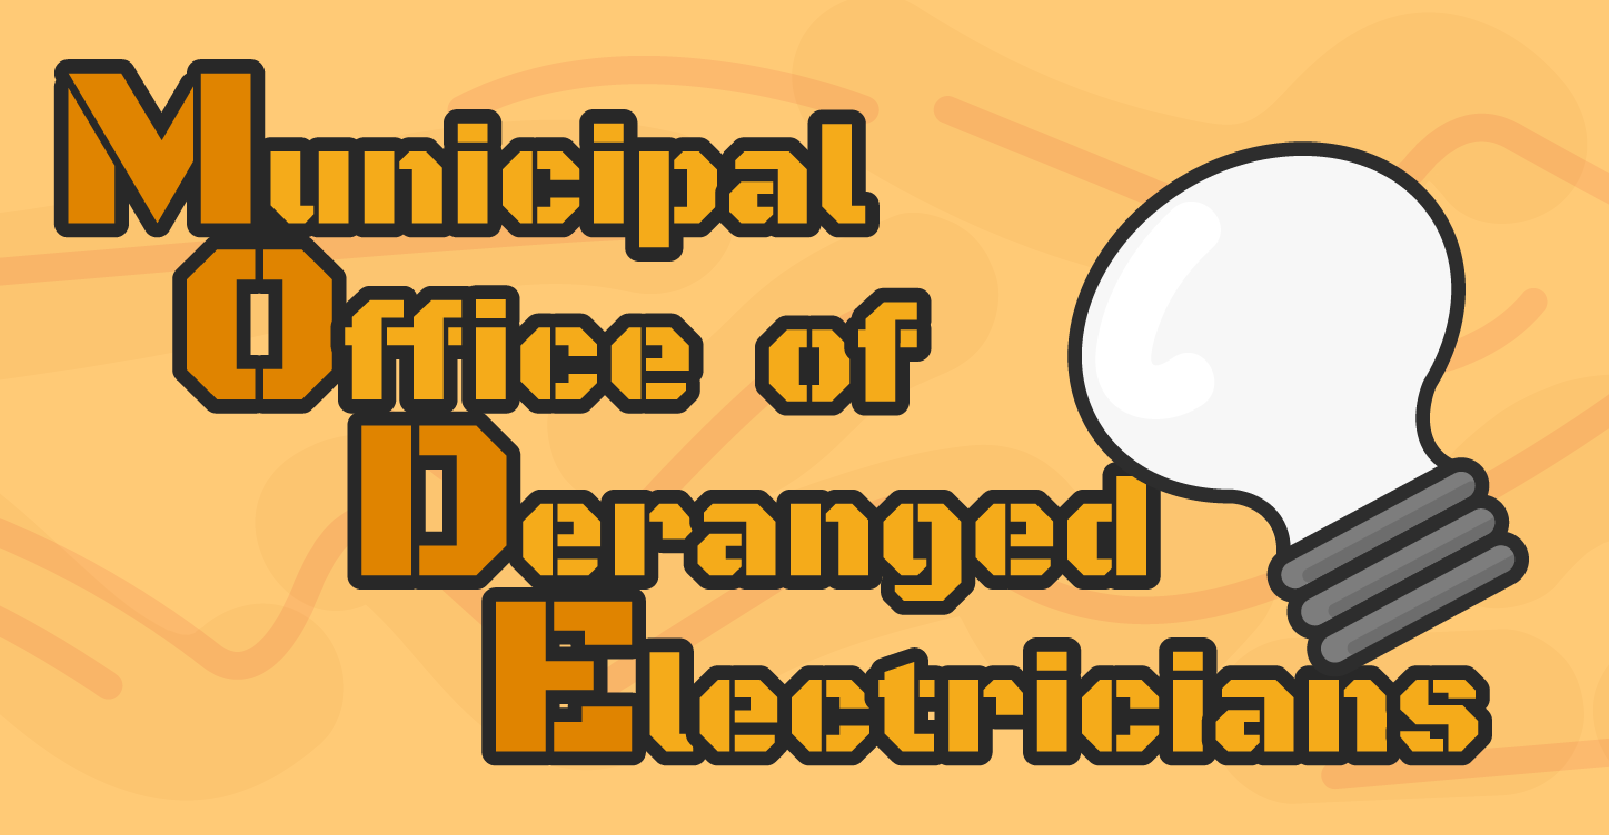 The Municipal Office of Deranged Electricians